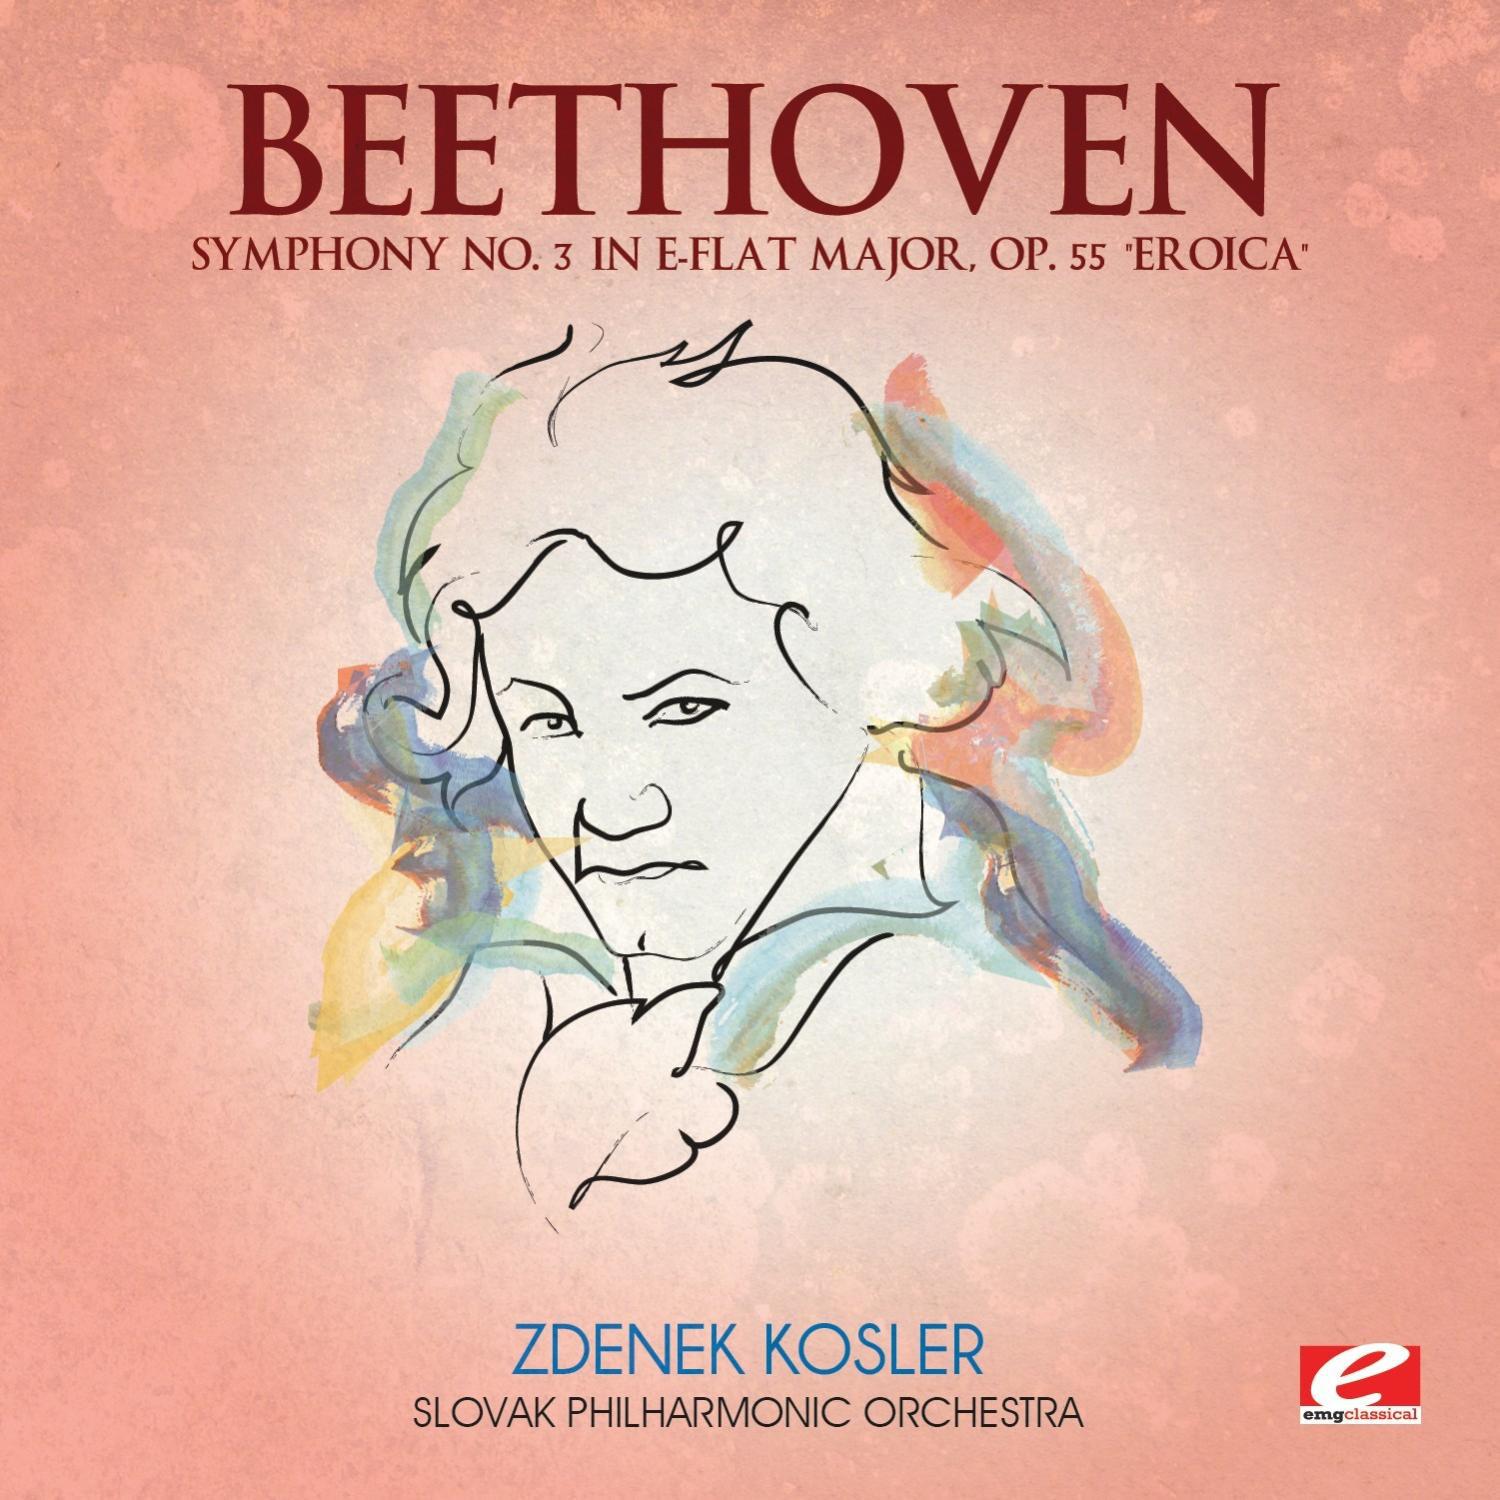 Beethoven: Symphony No. 3 in E-Flat Major, Op. 55 "Eroica" (Digitally Remastered)